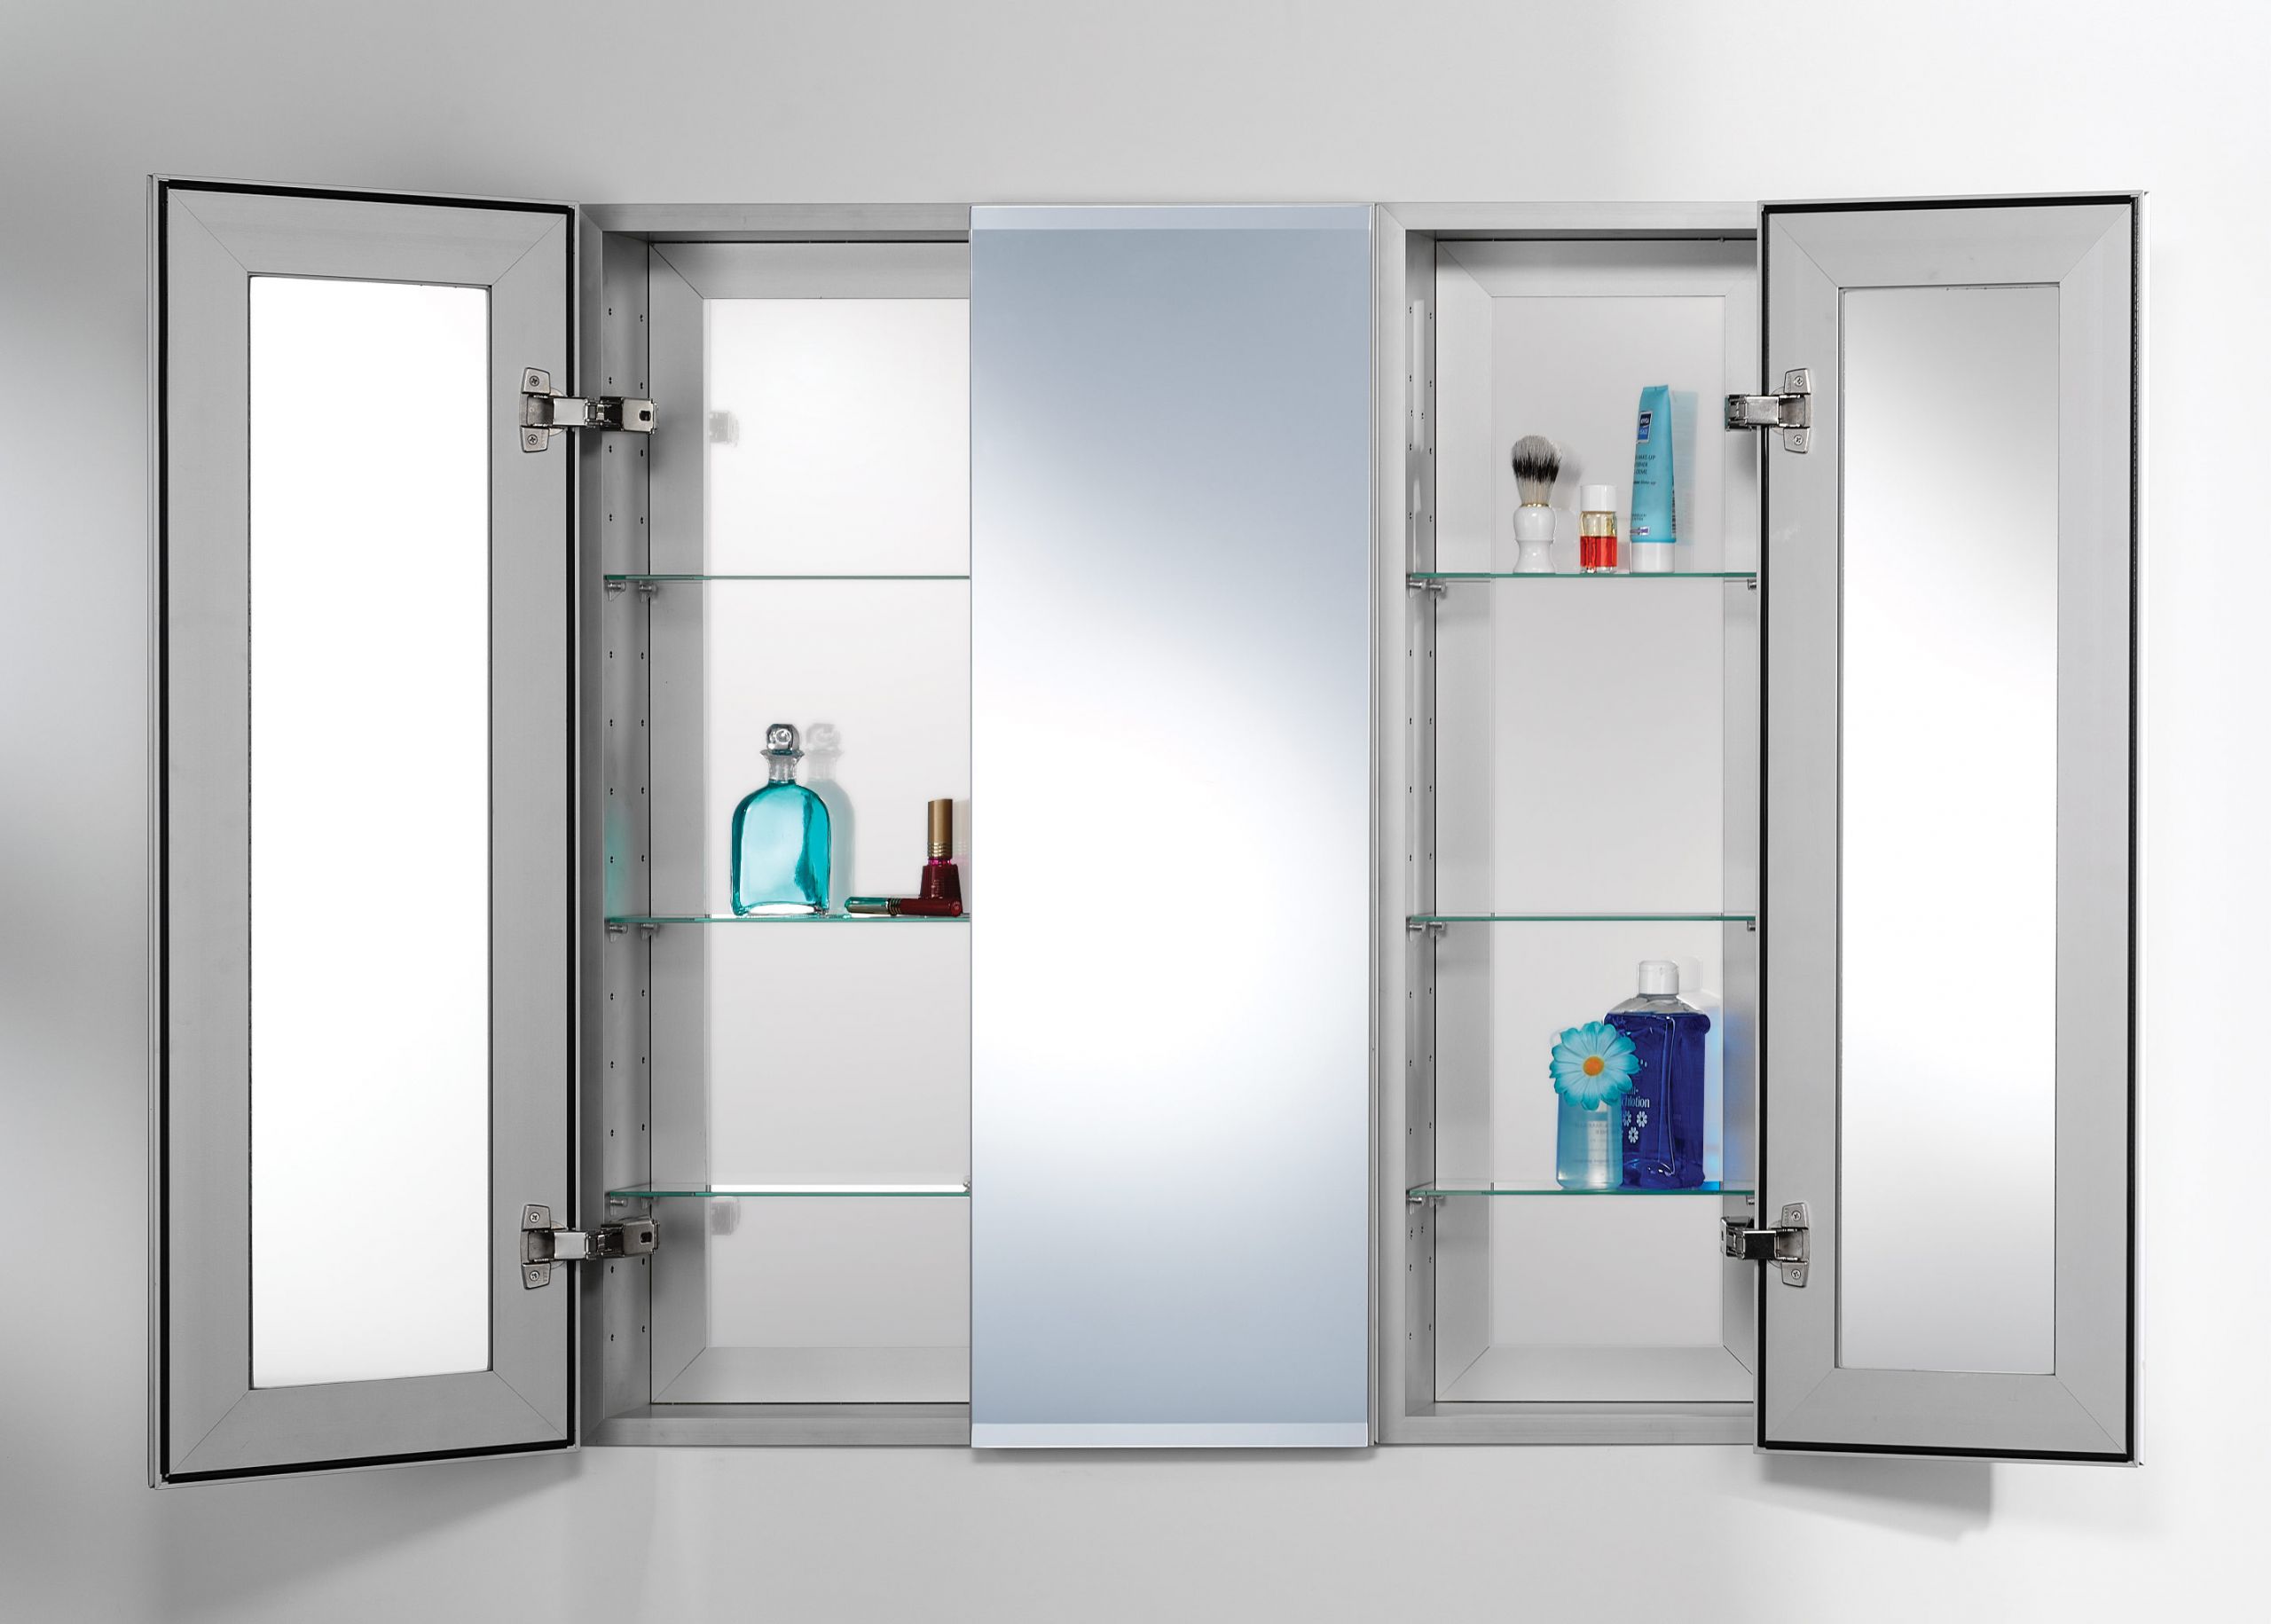 Bathroom Mirror Cabinet With Light
 Bathroom Medicine Cabinets – With Lights Recessed Mirrored